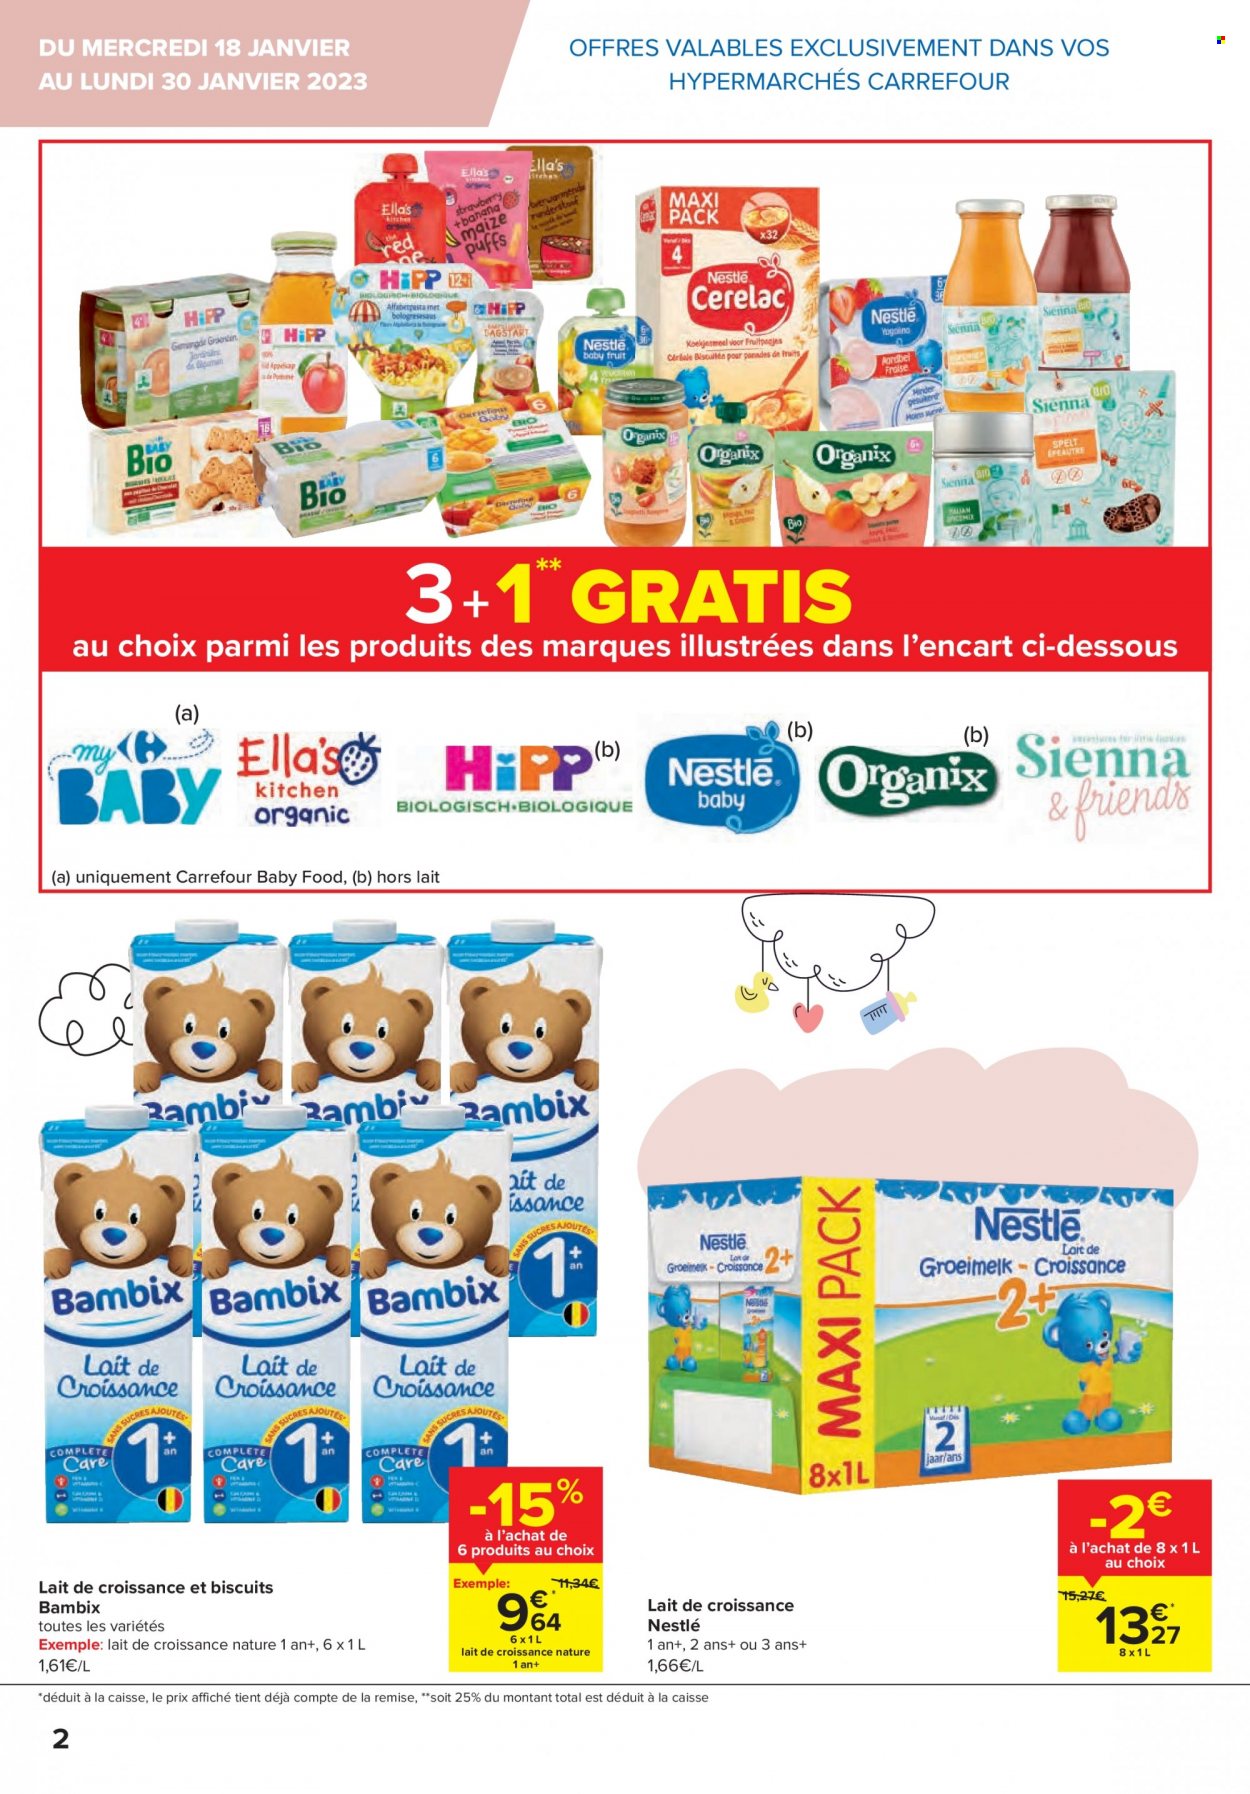 Catalogue Carrefour hypermarkt - 18.1.2023 - 30.1.2023. Page 2.